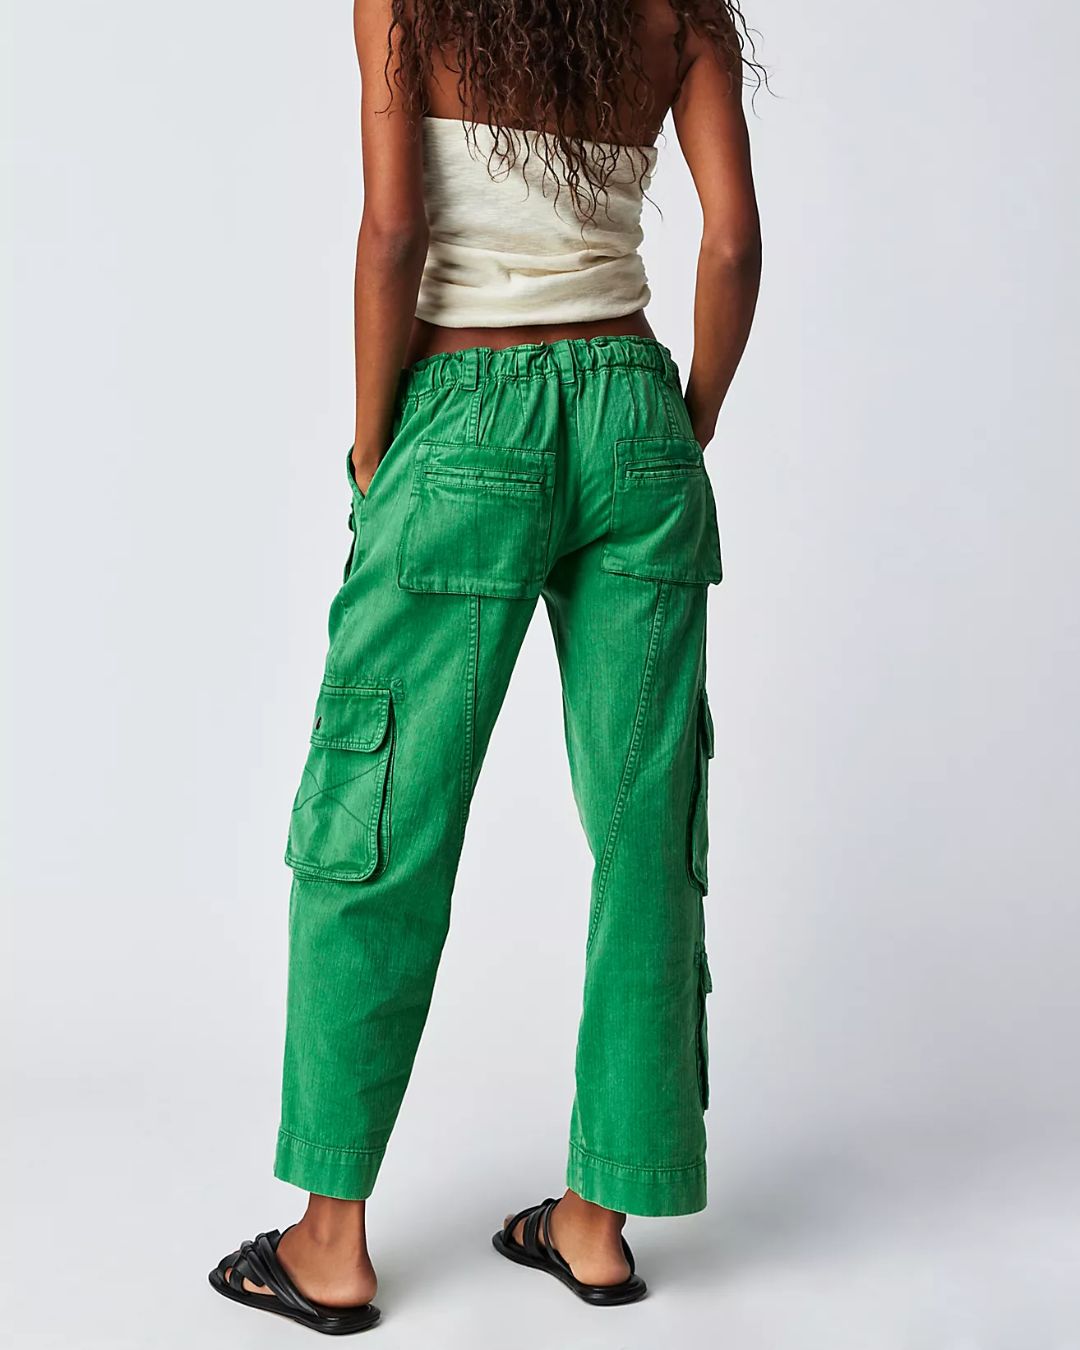 flap-pocket-cargo-green,FLAP-POCKET CARGO,Color: Green
Fabric: Cotton
Fit: Relaxed Fit 
Type: Wide Leg
Length: Ankle Length(36 in)
Waist: Low Rise
Closure: Button & Zipper
No. of Pockets: 9
Print: Solid,bottomwear,cargos,casual,streetwear,woven,cotton,green,flap pocket, multi pocket,relaxed fit,wide leg,ankle length,low rise